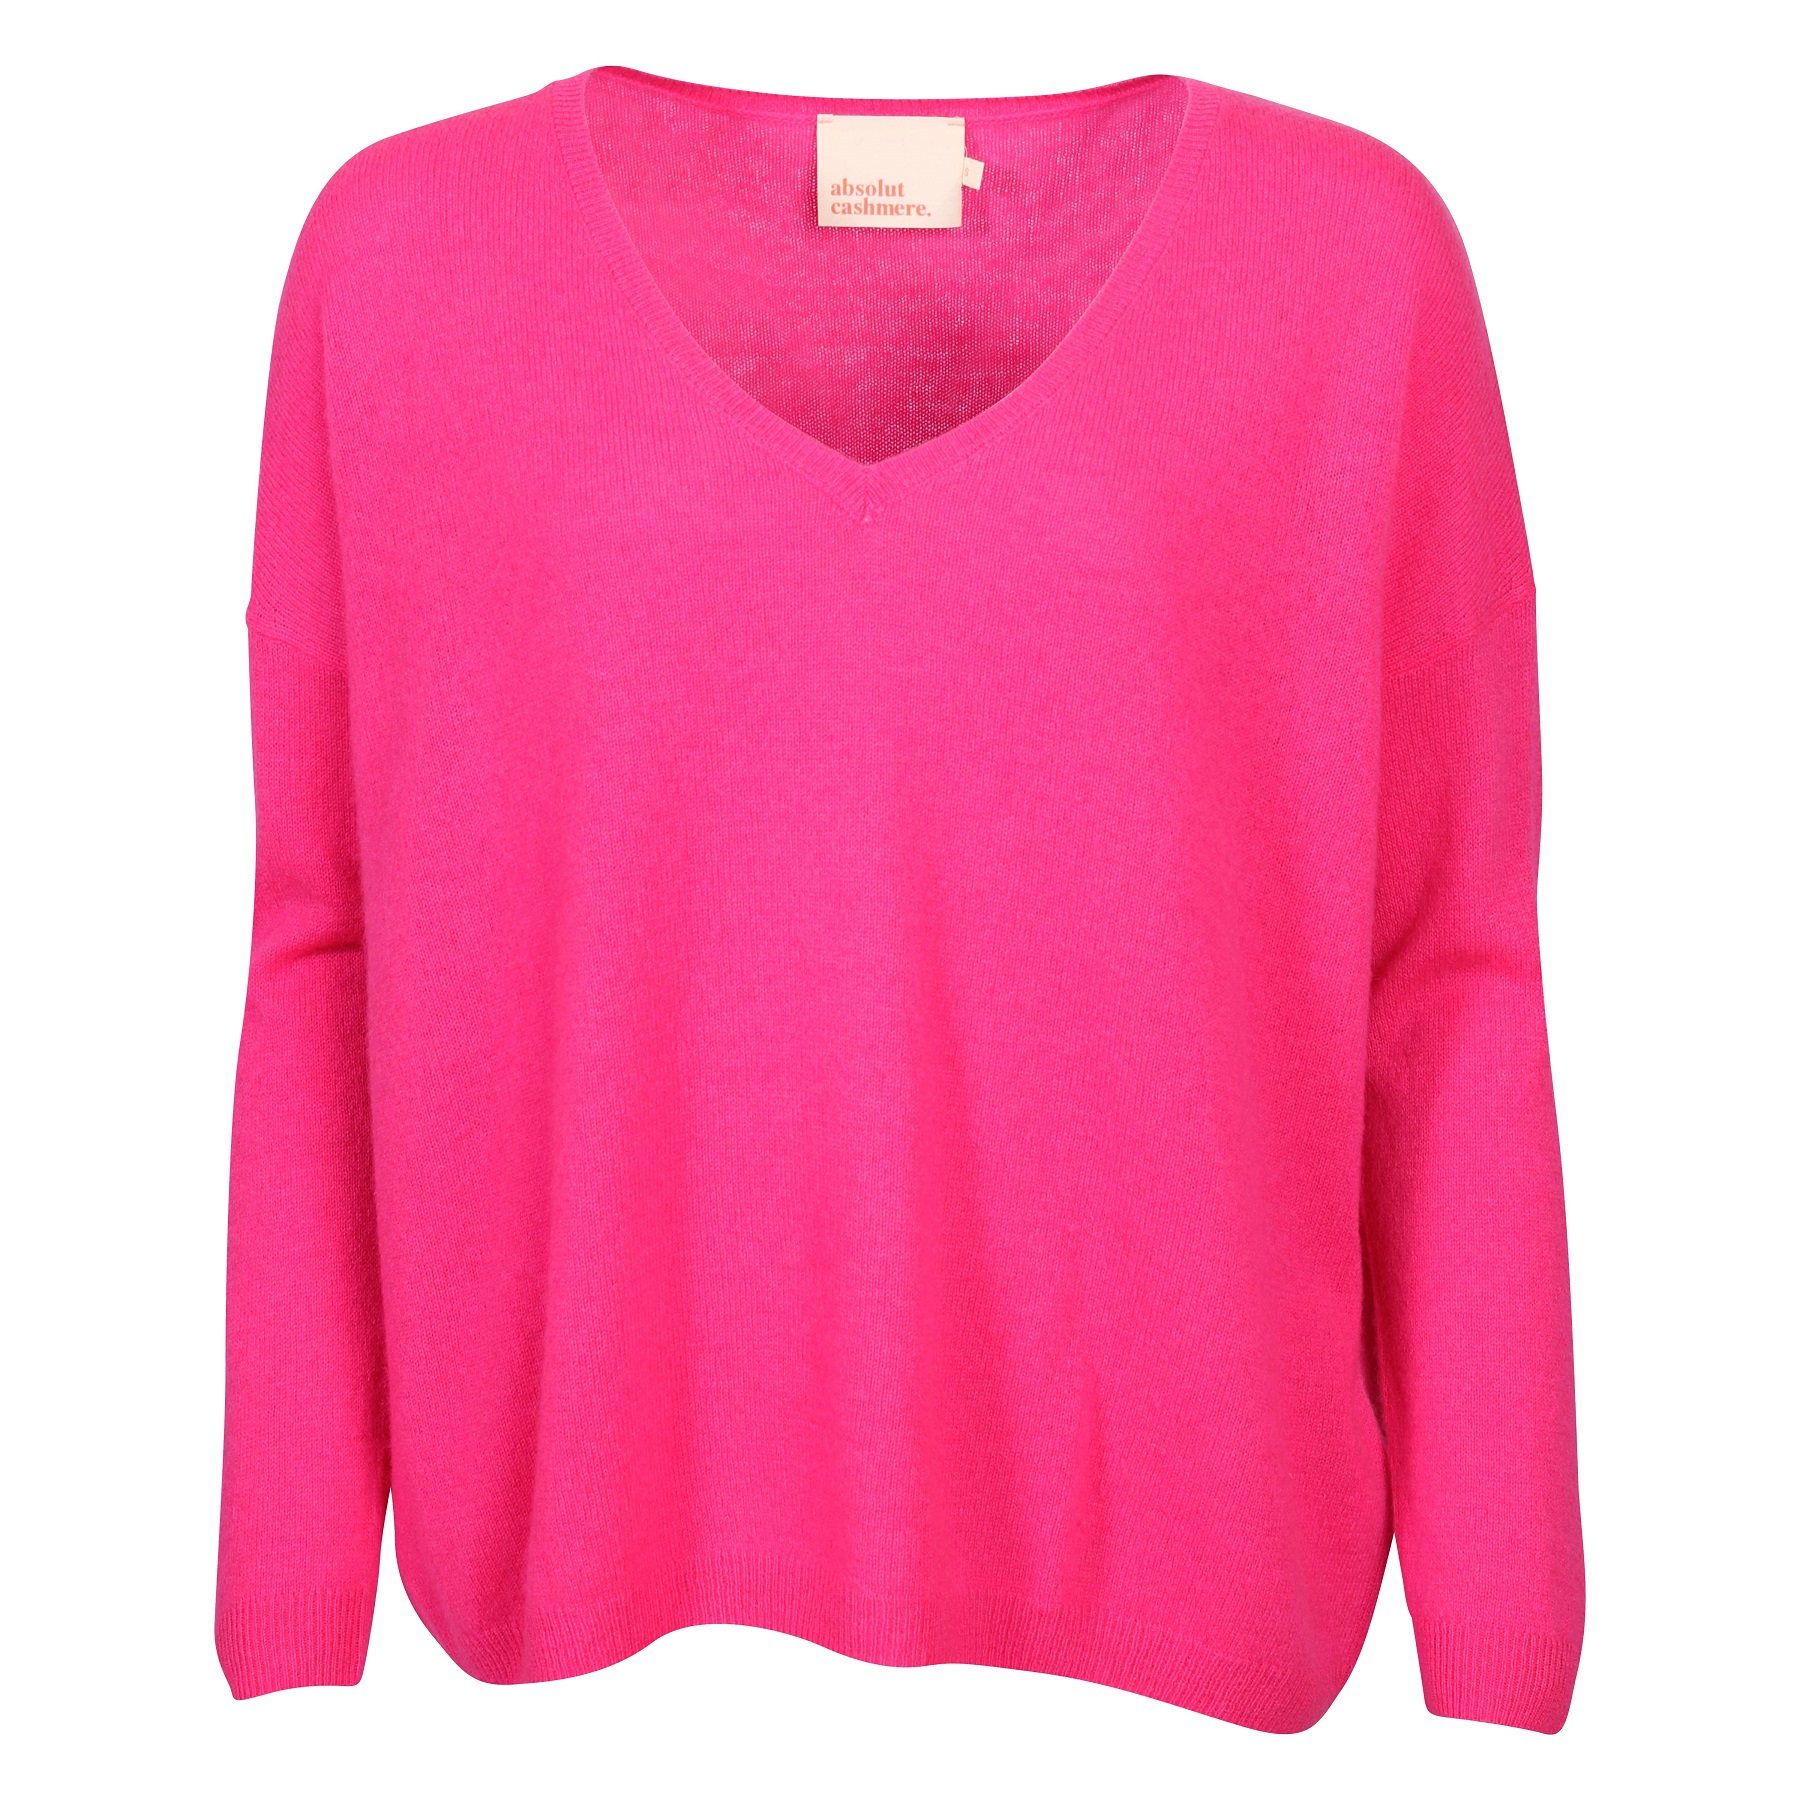 Absolut Cashmere Pullover Angele in Pink XS